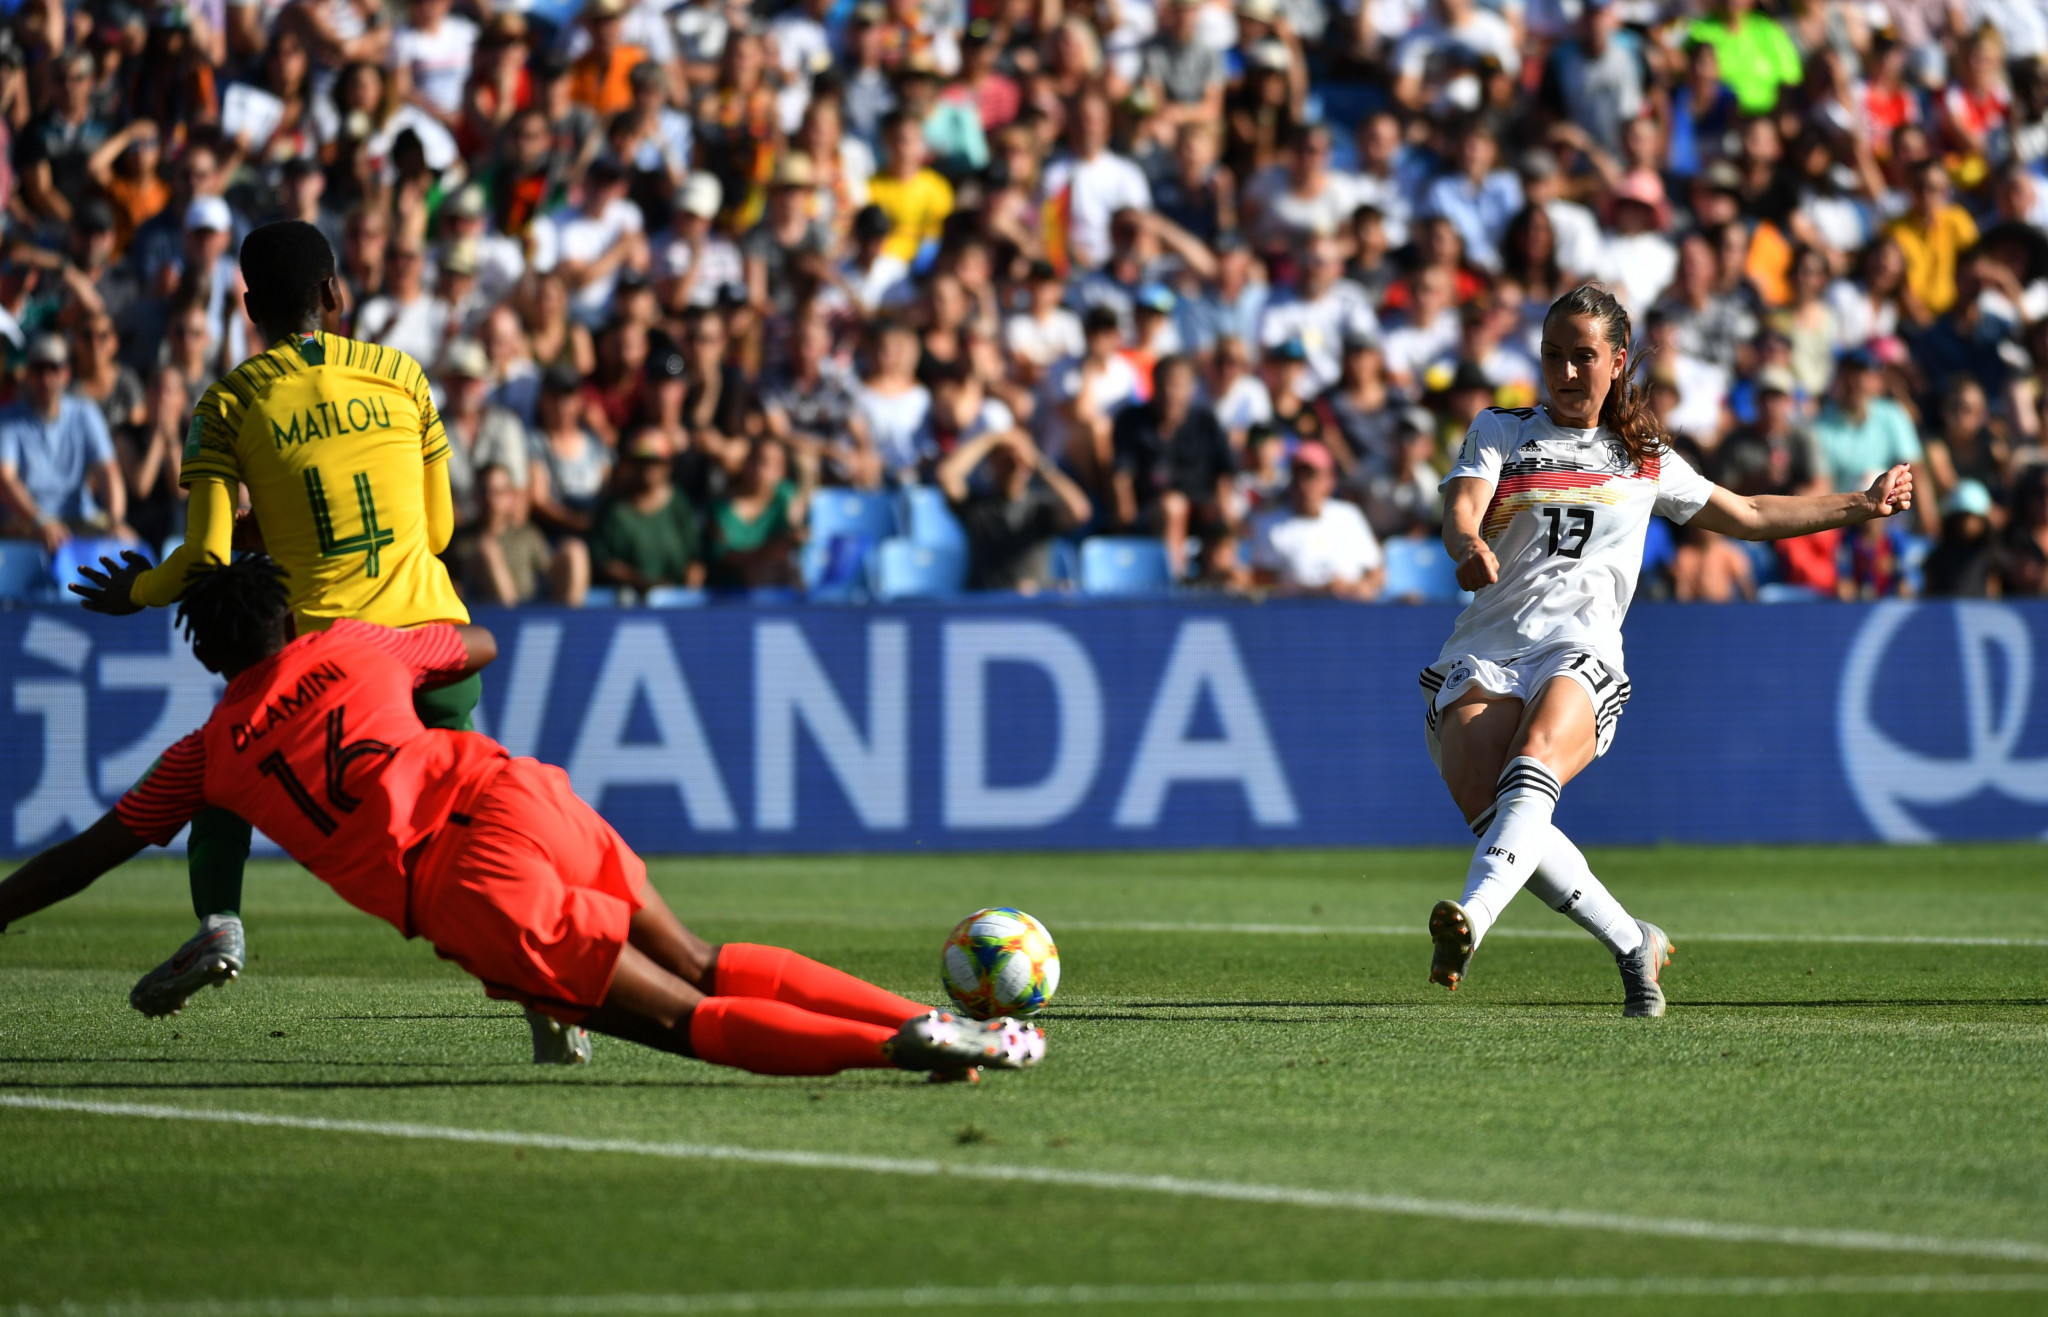 Sara Dabritz doubles Germany's lead after a glaring error from South Africa goalkeeper Andile Dlamini ©Getty Images